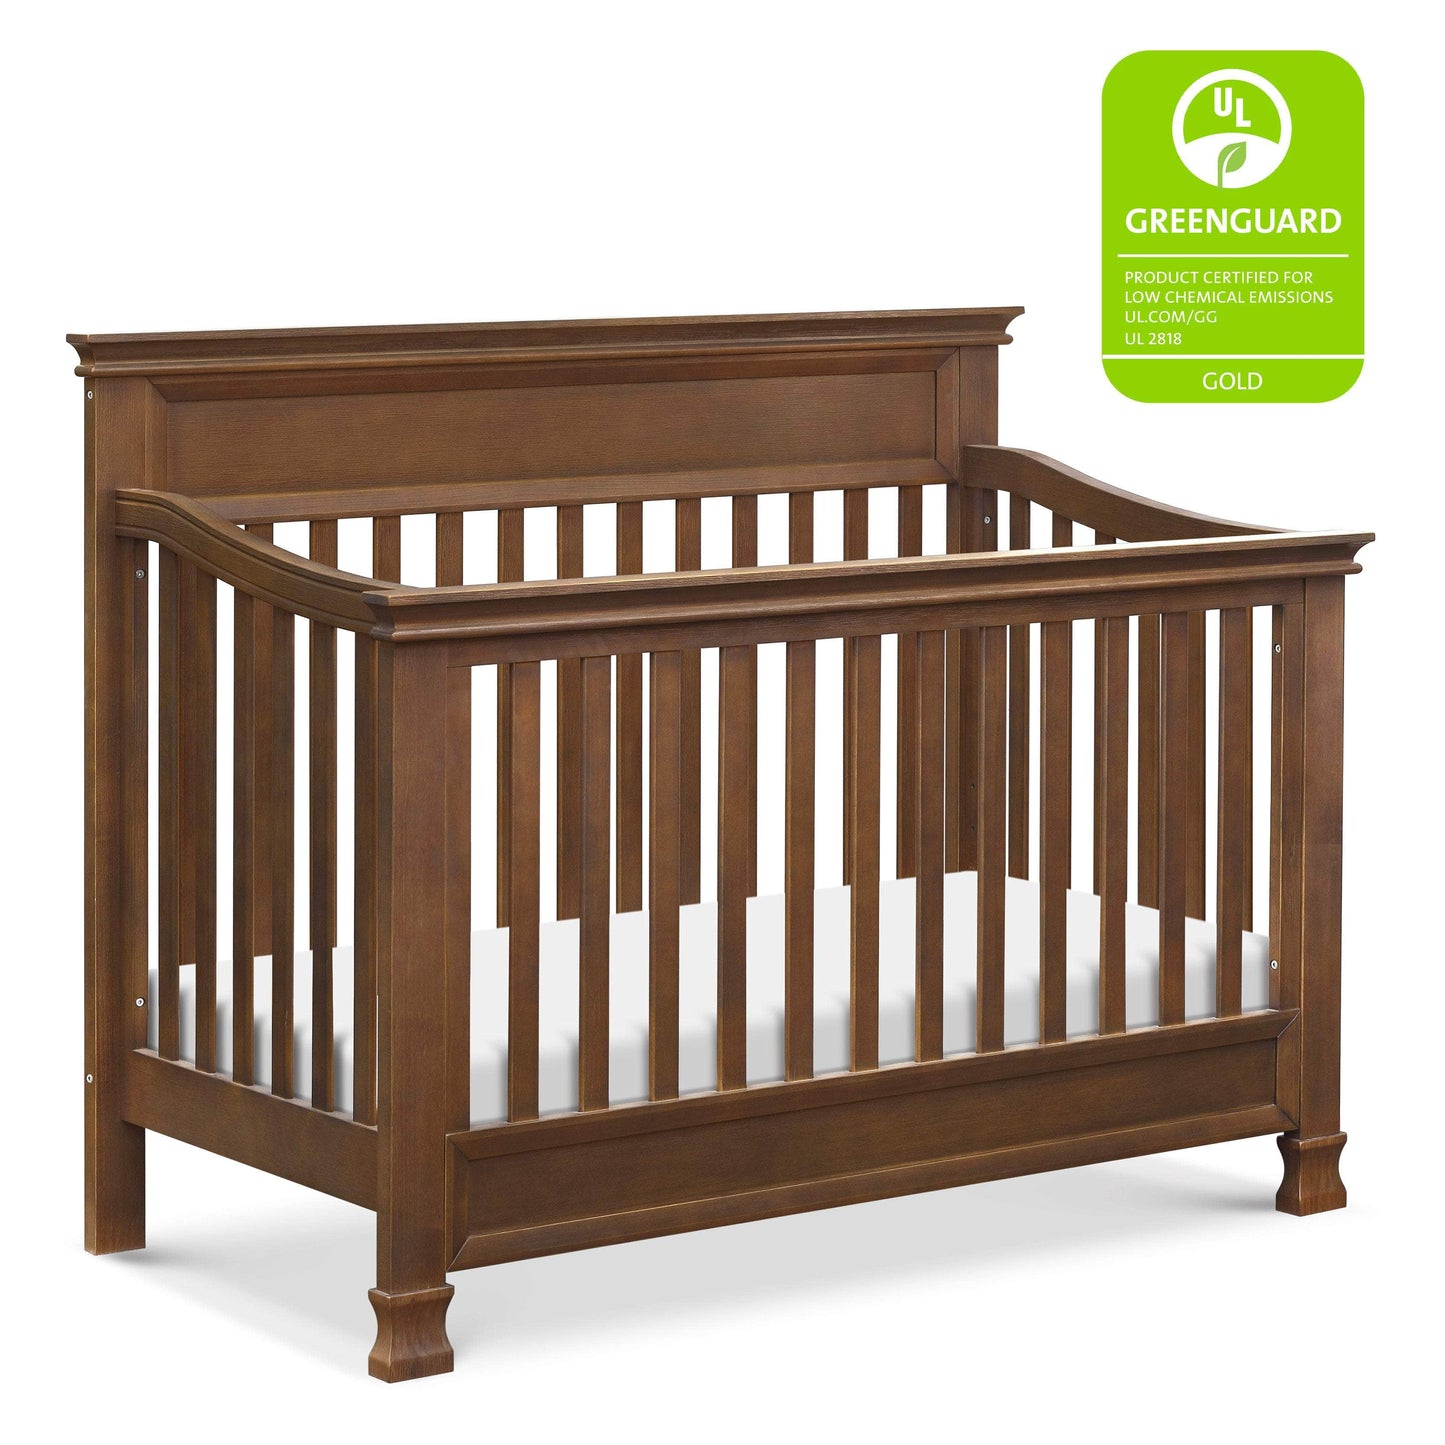 M3901MO,Foothill 4-in-1 Convertible Crib in Mocha